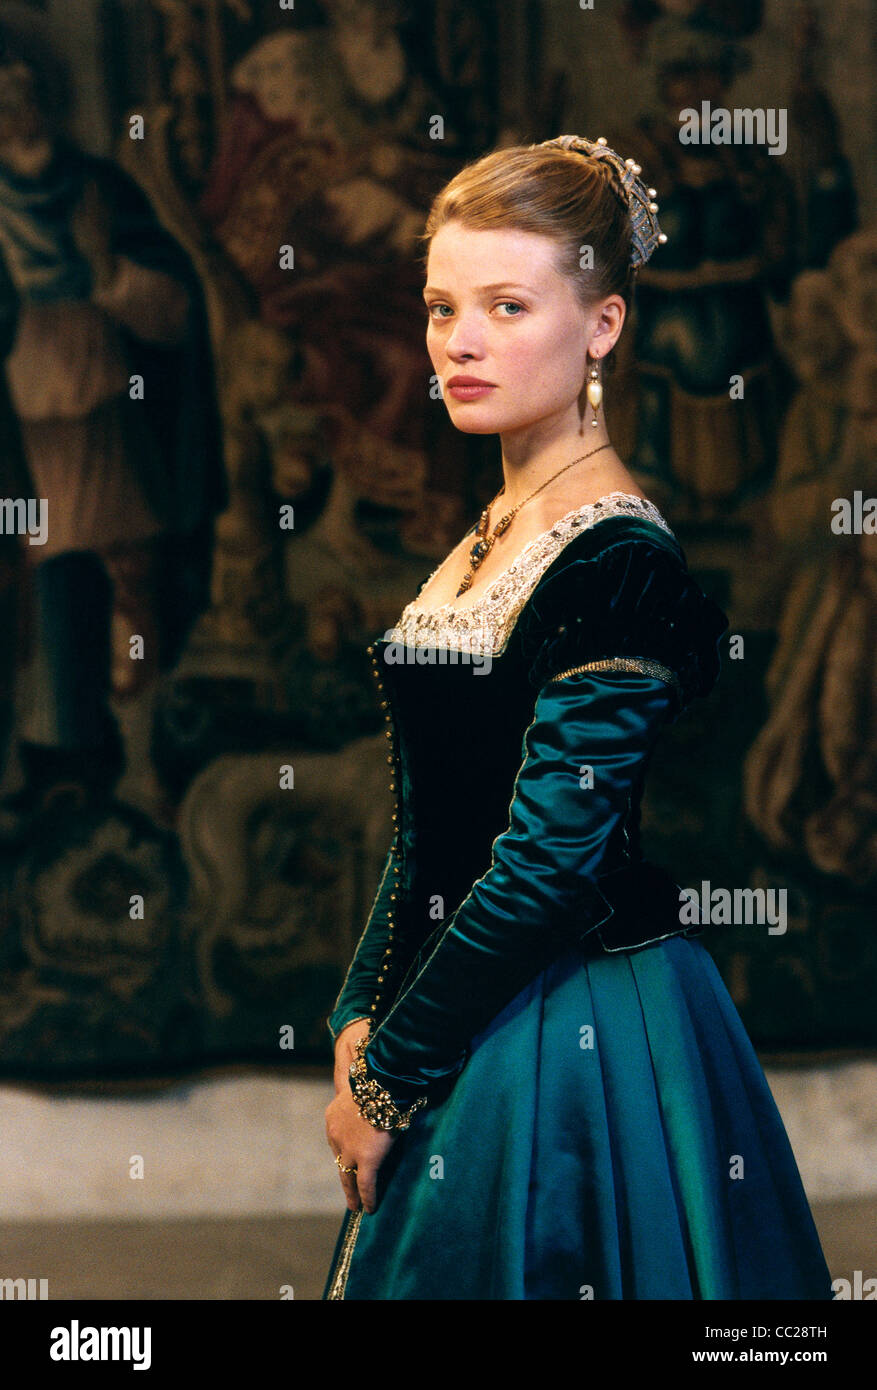 Melanie Thierry in The Princess Of Montpensier (2021)